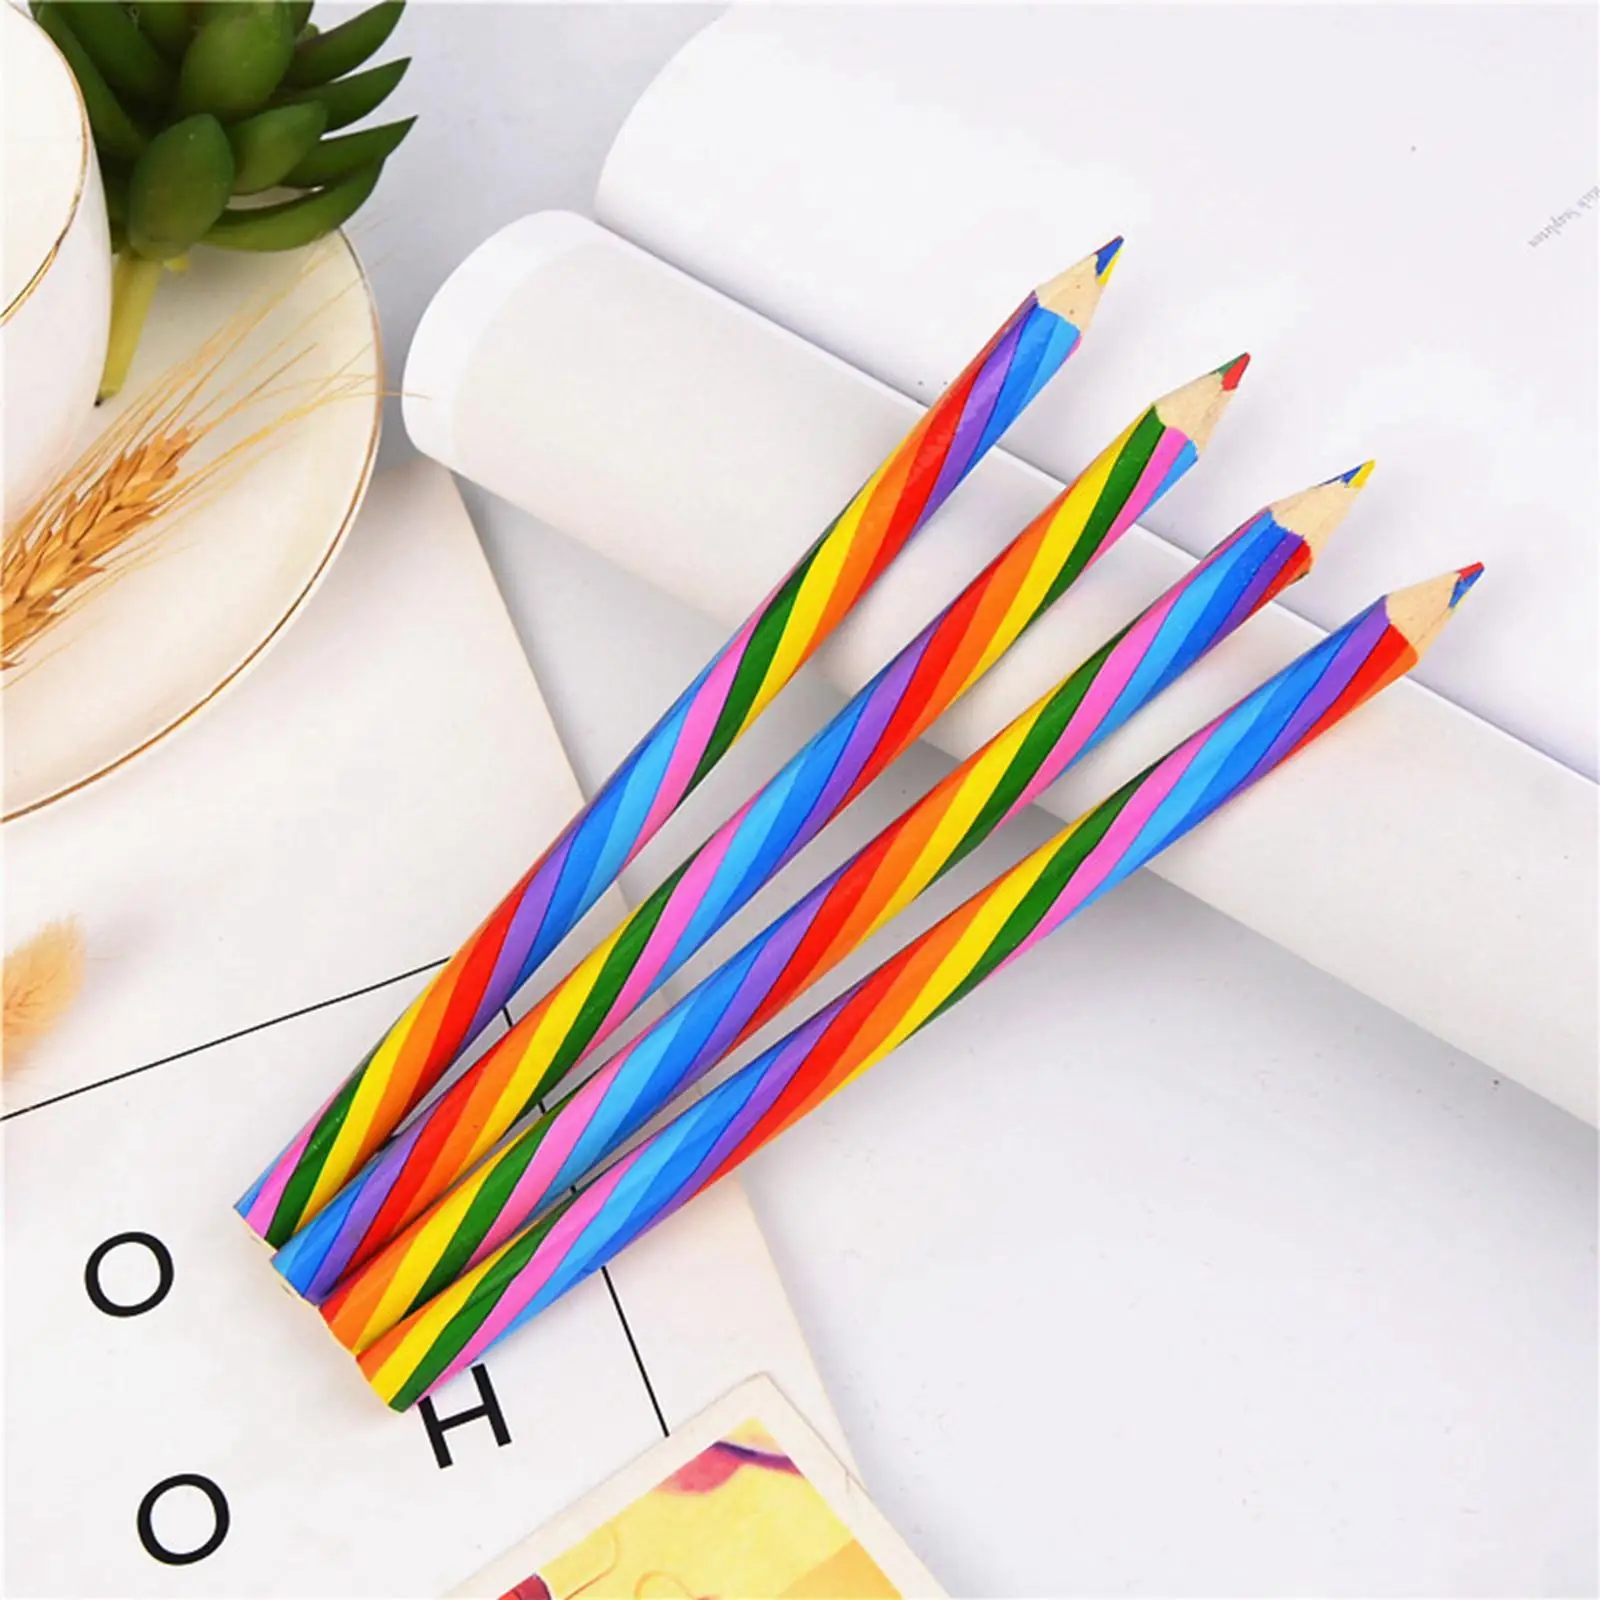 Set of 12 Painting Pencils Multicolored Art Pencils with Pencil Sharpeners Colored Pencils for Drawing, Shading, Stationery